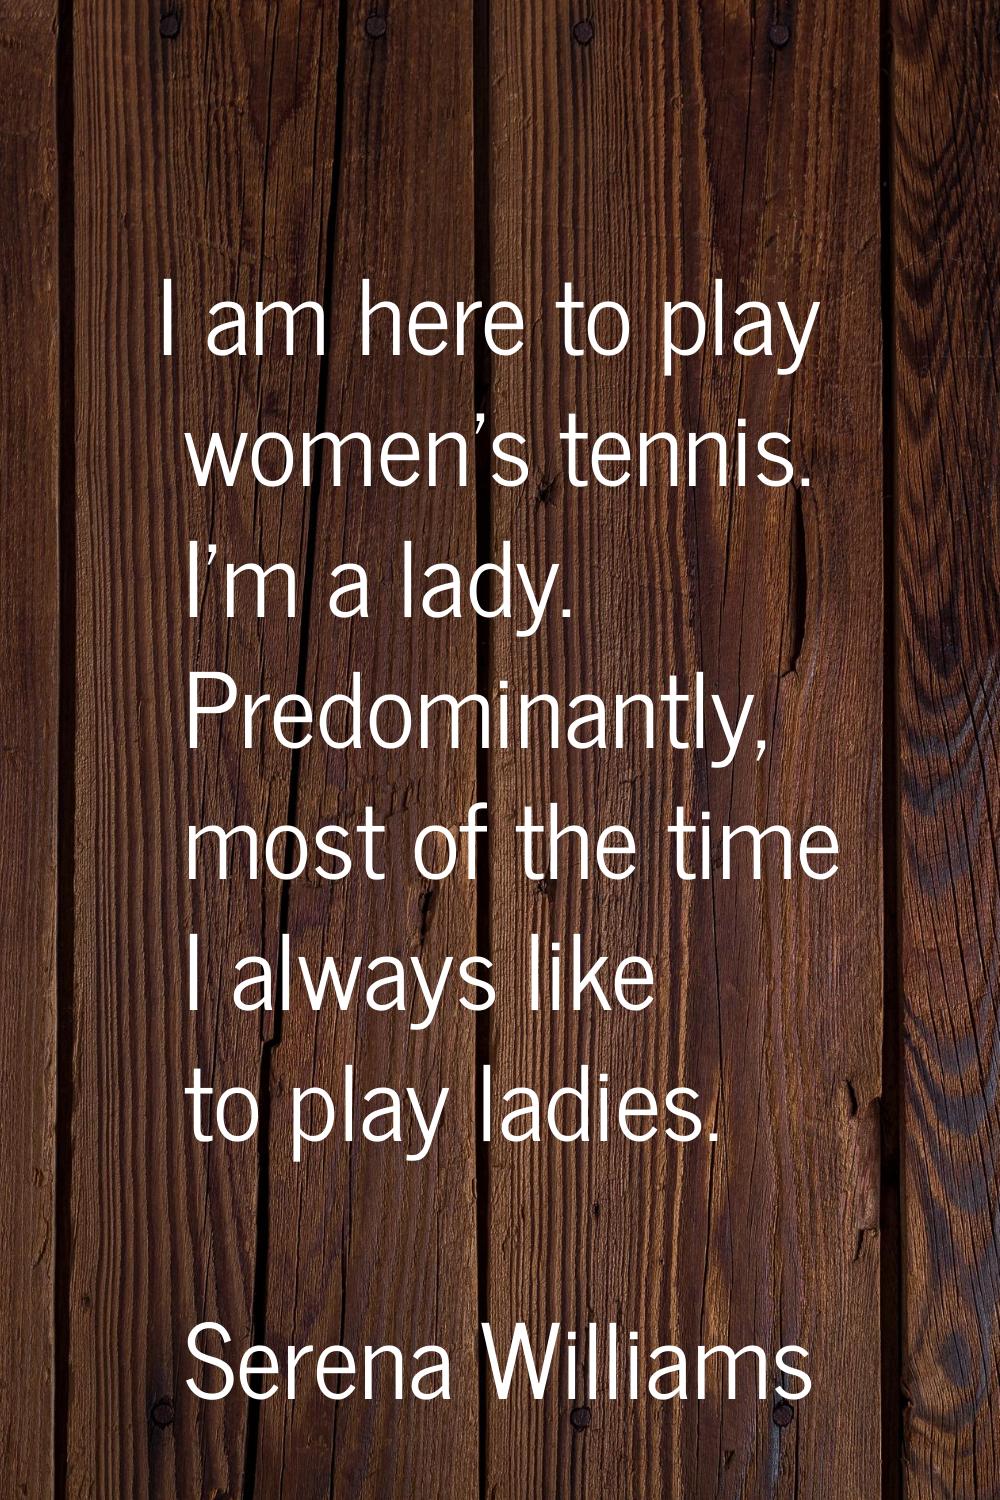 I am here to play women's tennis. I'm a lady. Predominantly, most of the time I always like to play